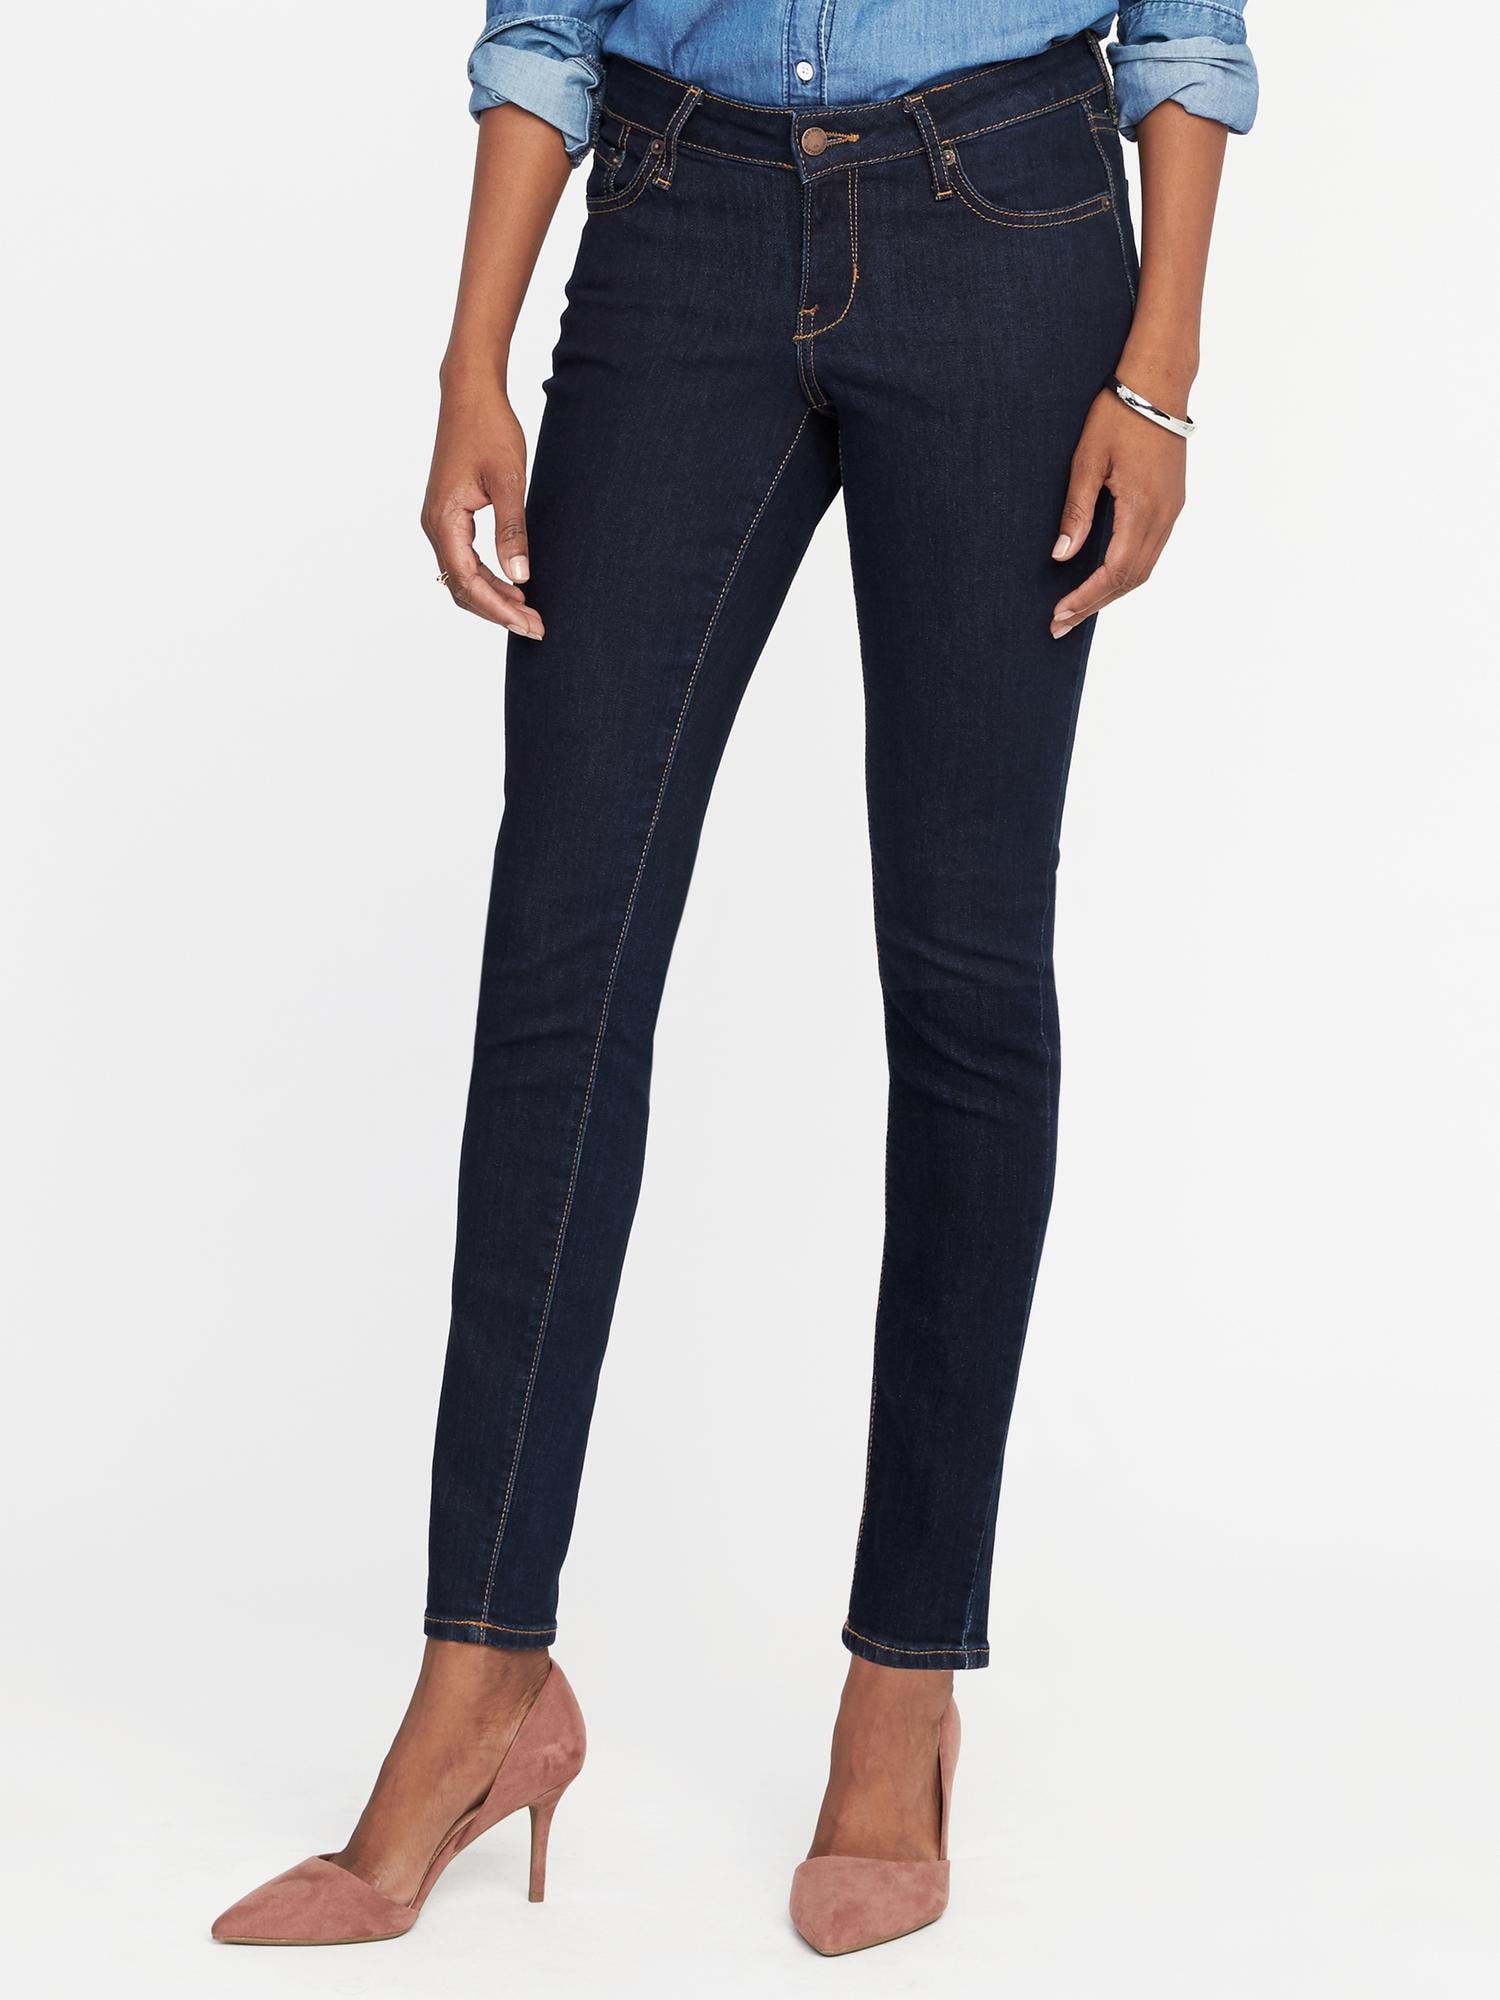 old navy soft jeans